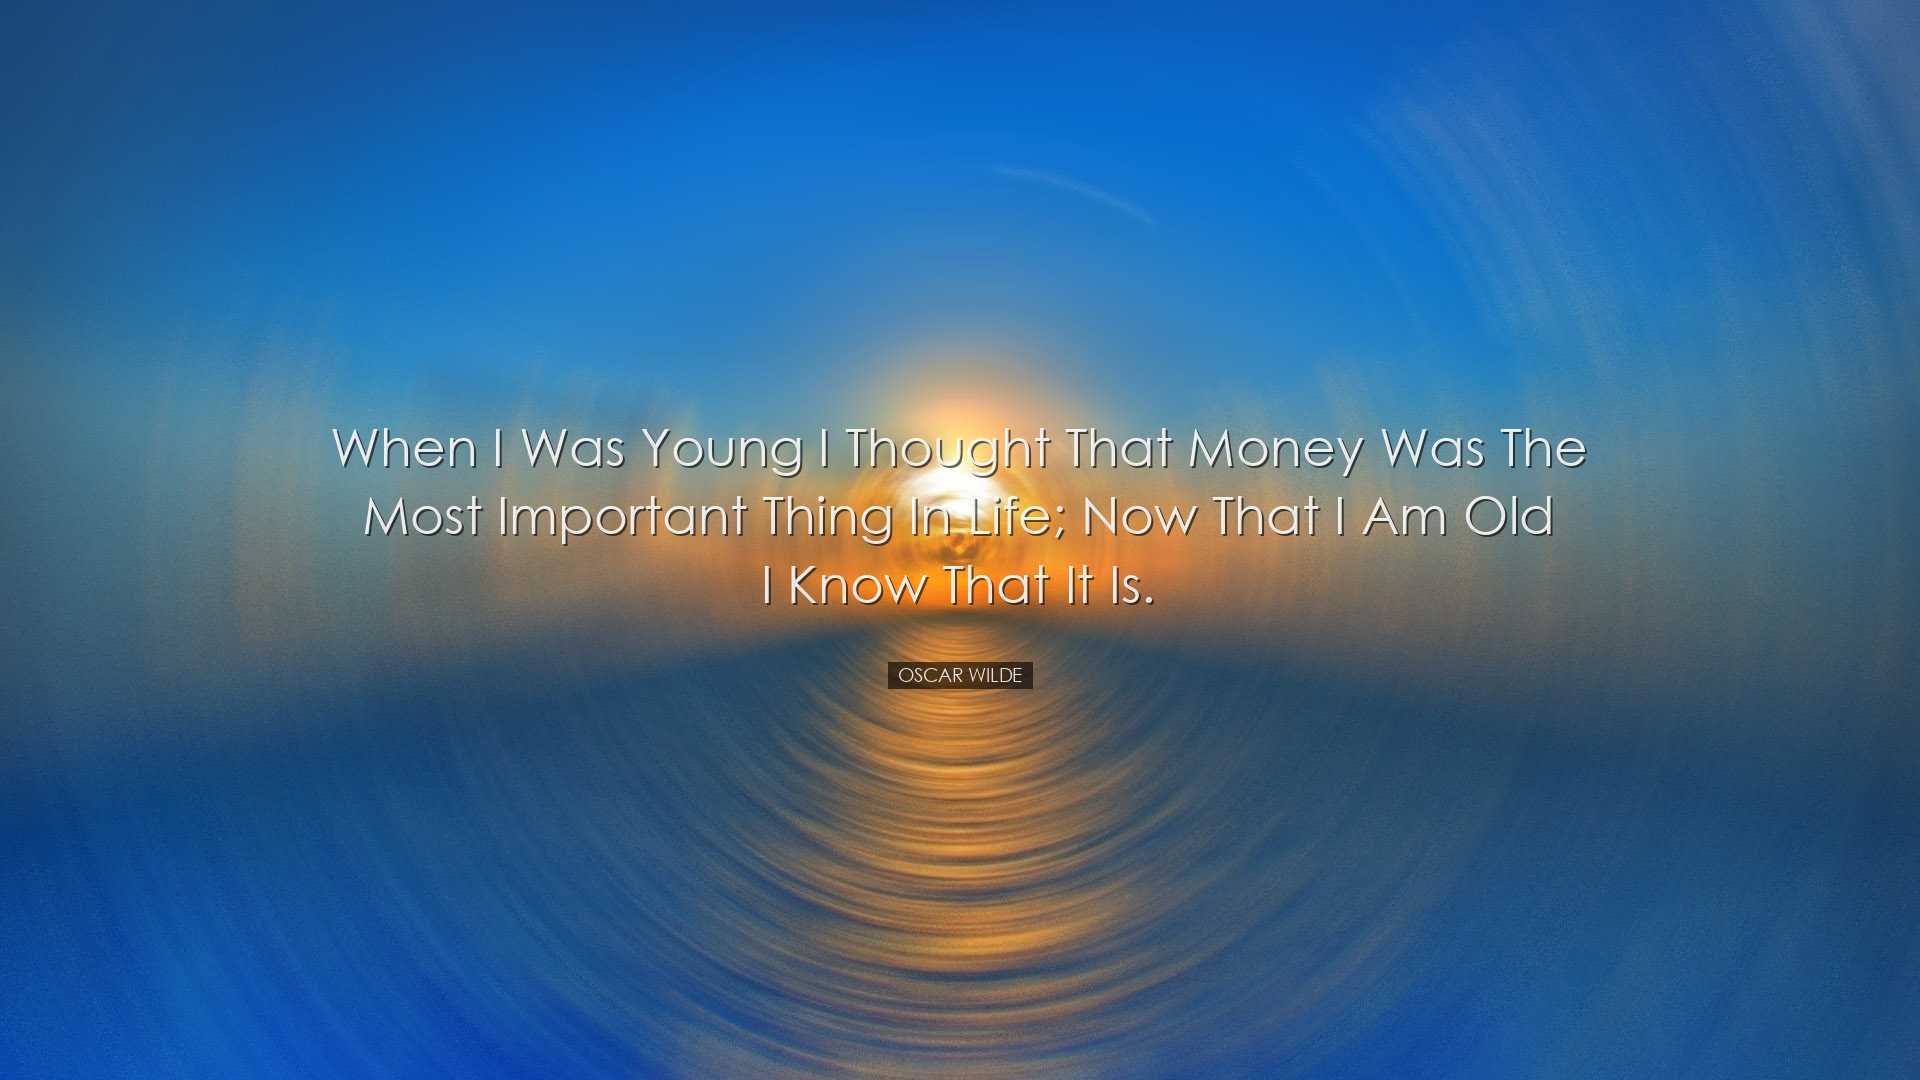 When I was young I thought that money was the most important thing